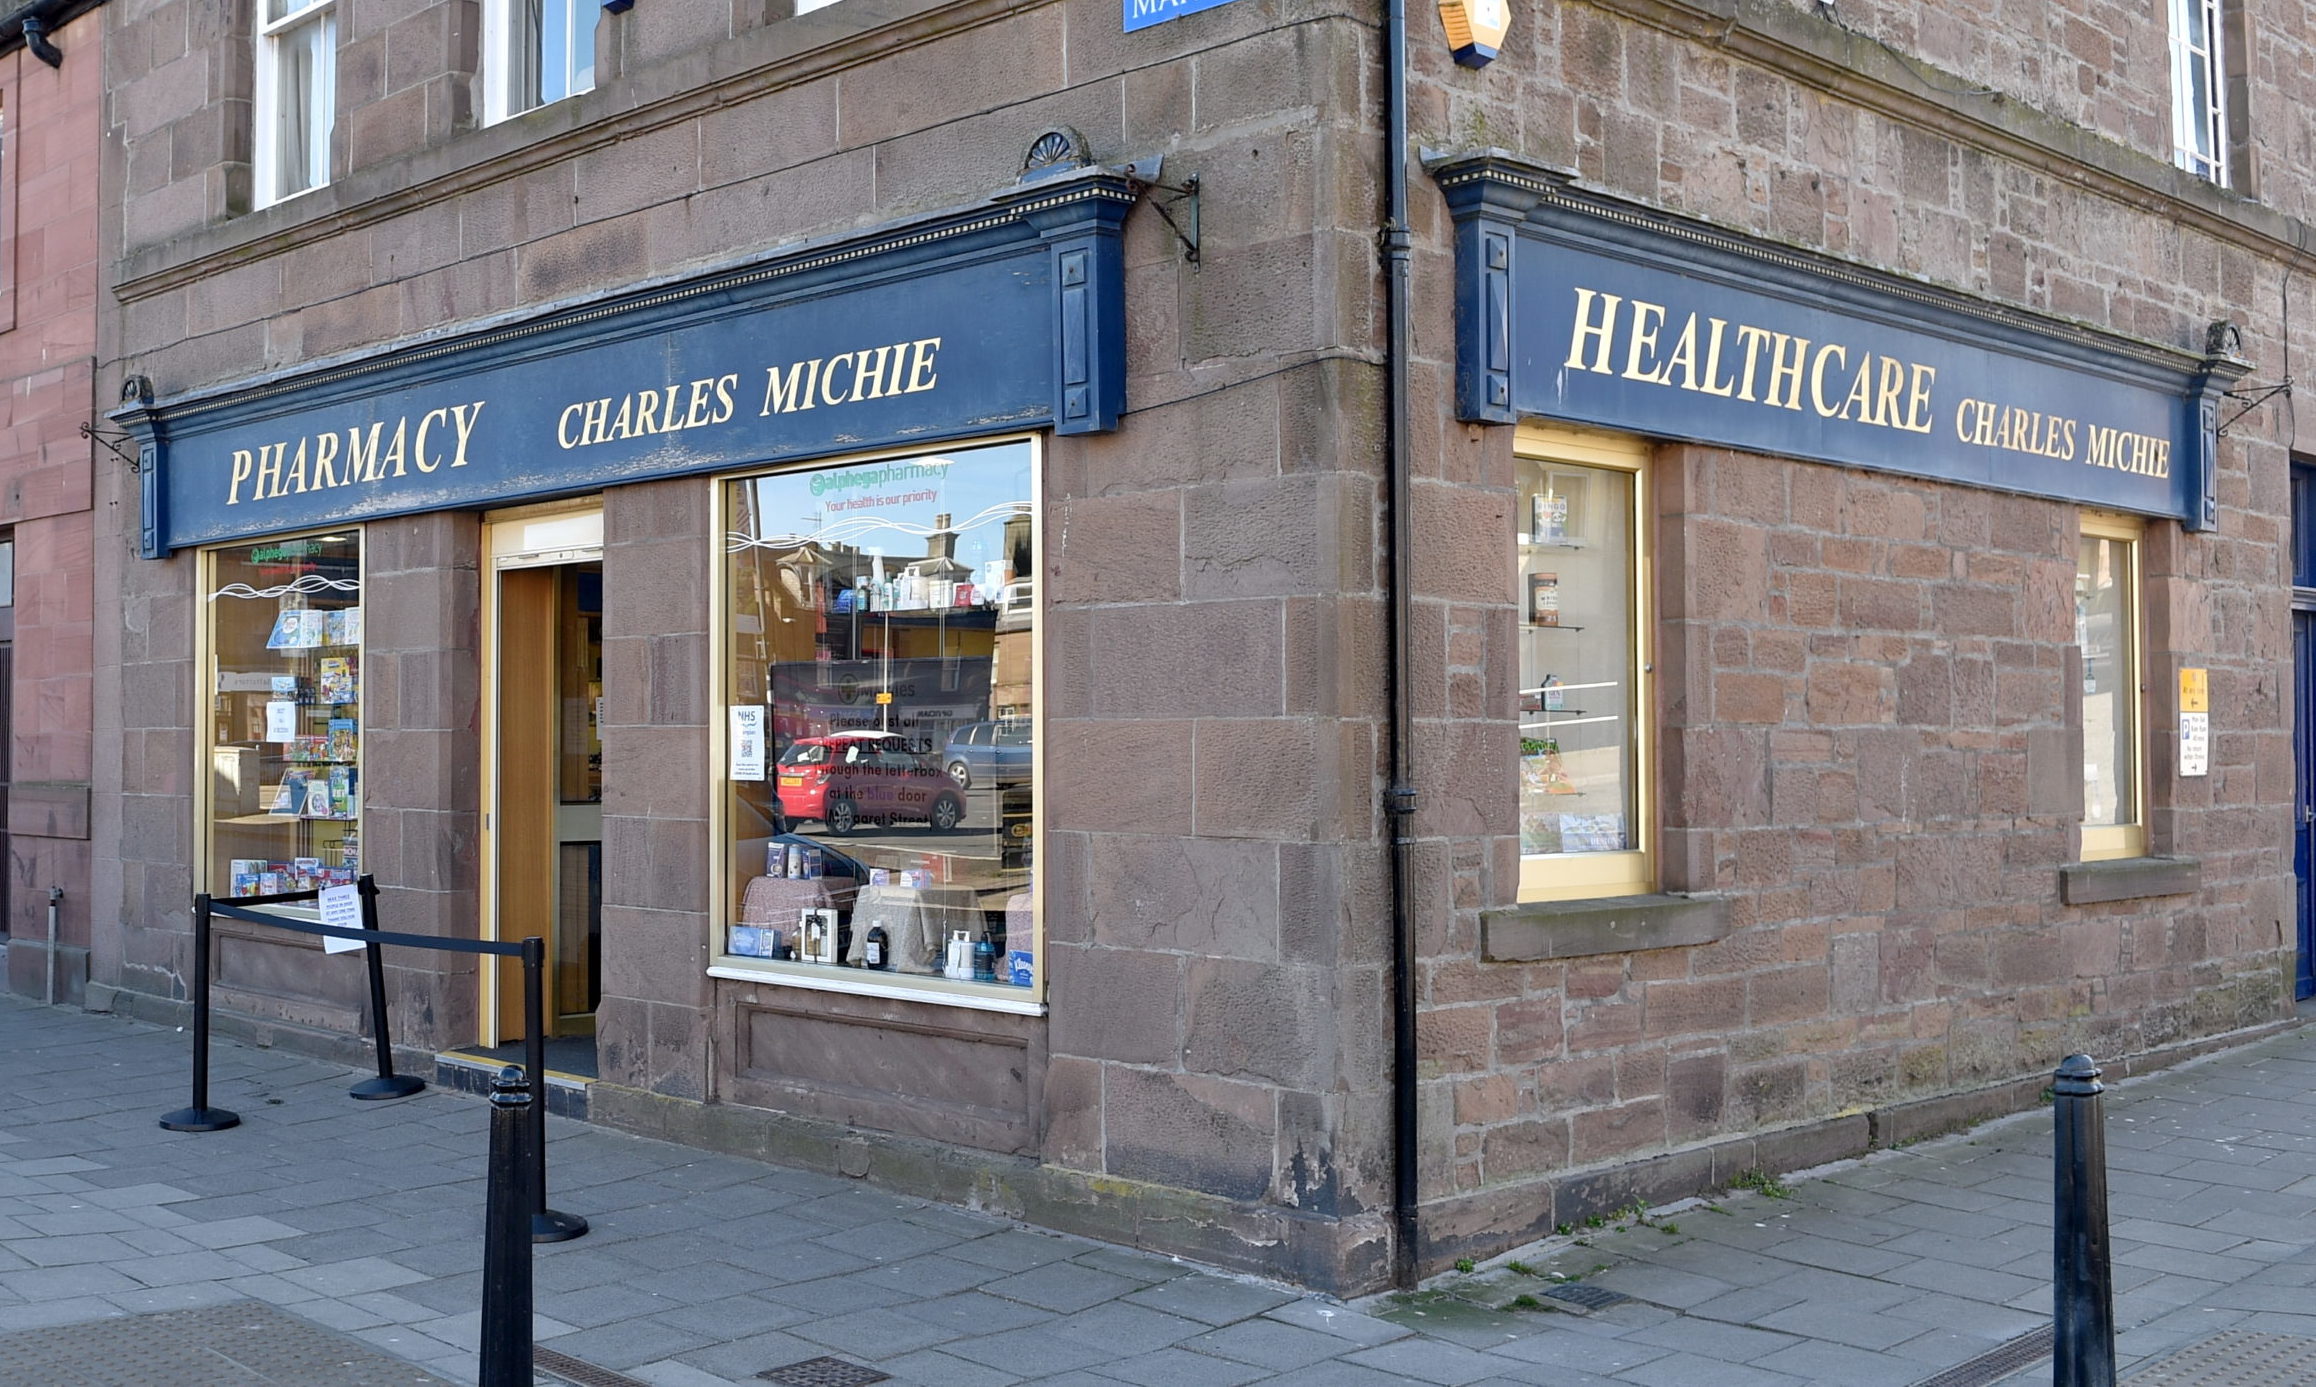 Charles Michie Pharmacy, Market Square, Stonehaven.
Picture by DARRELL BENNS